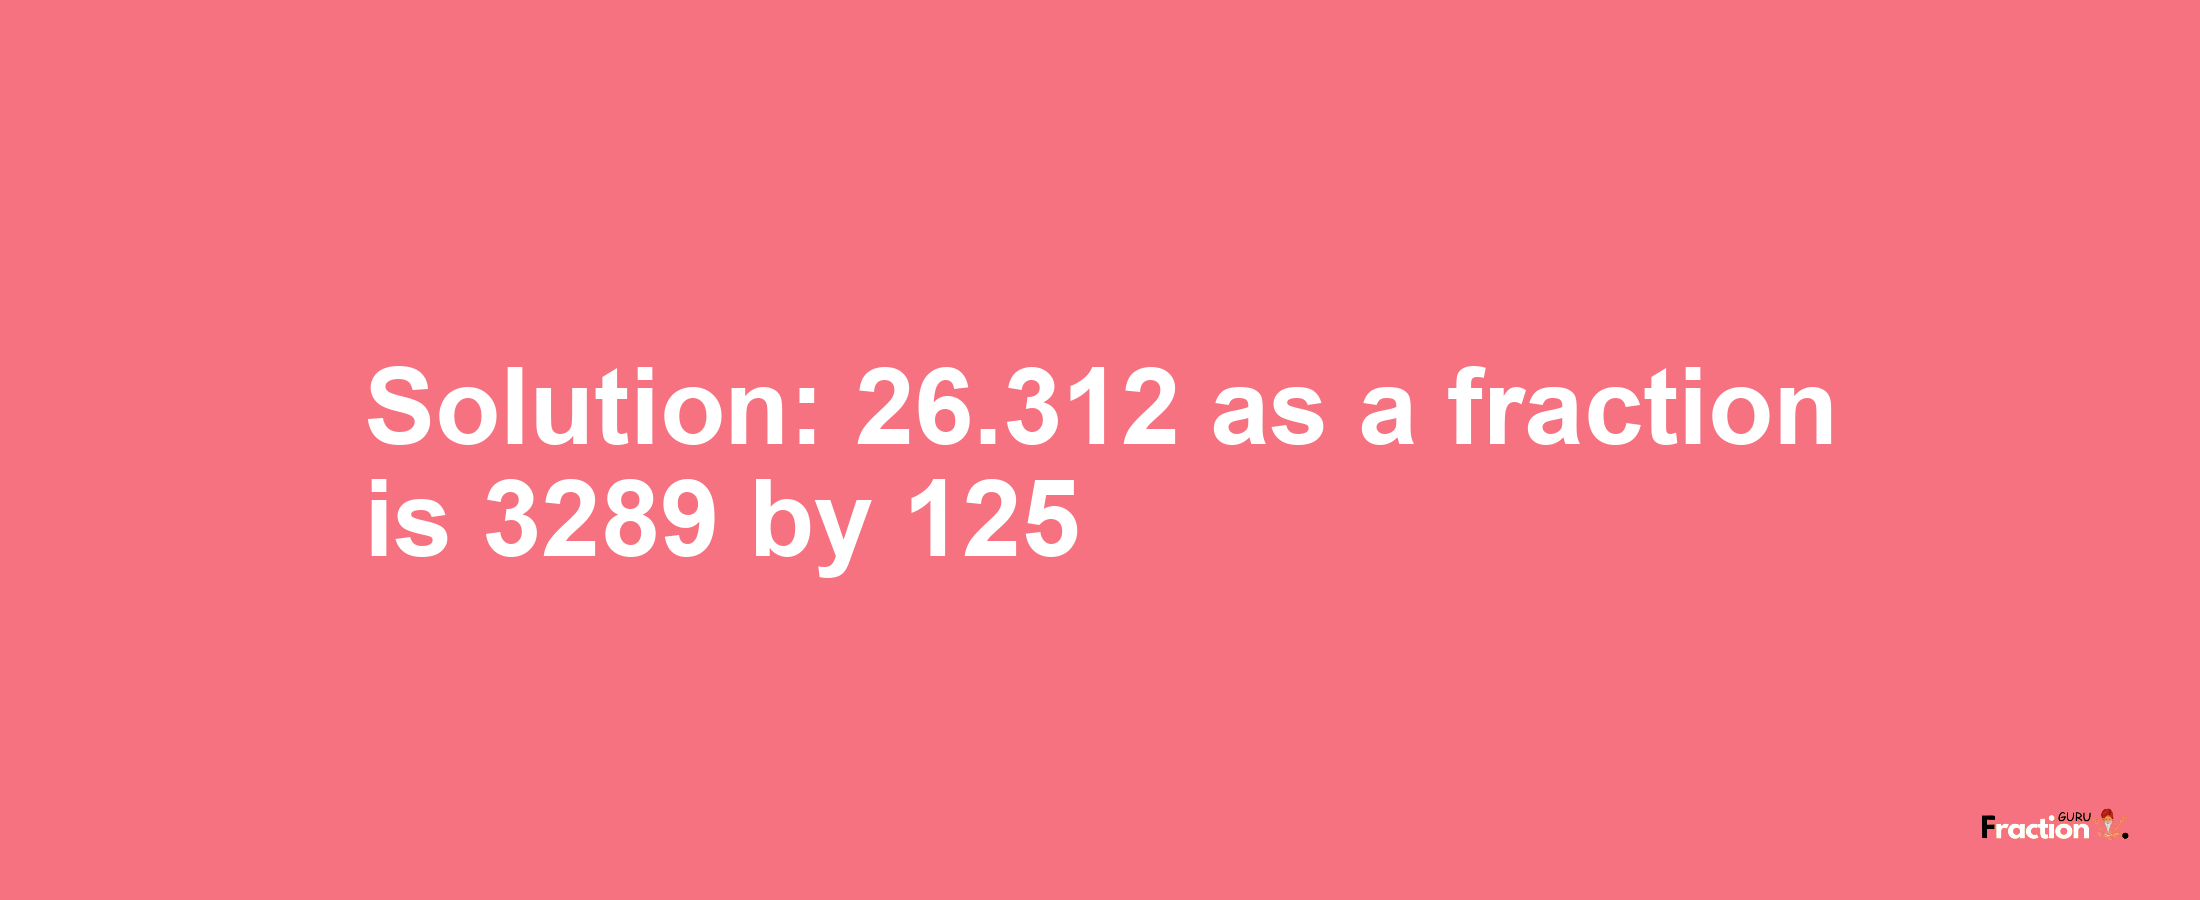 Solution:26.312 as a fraction is 3289/125